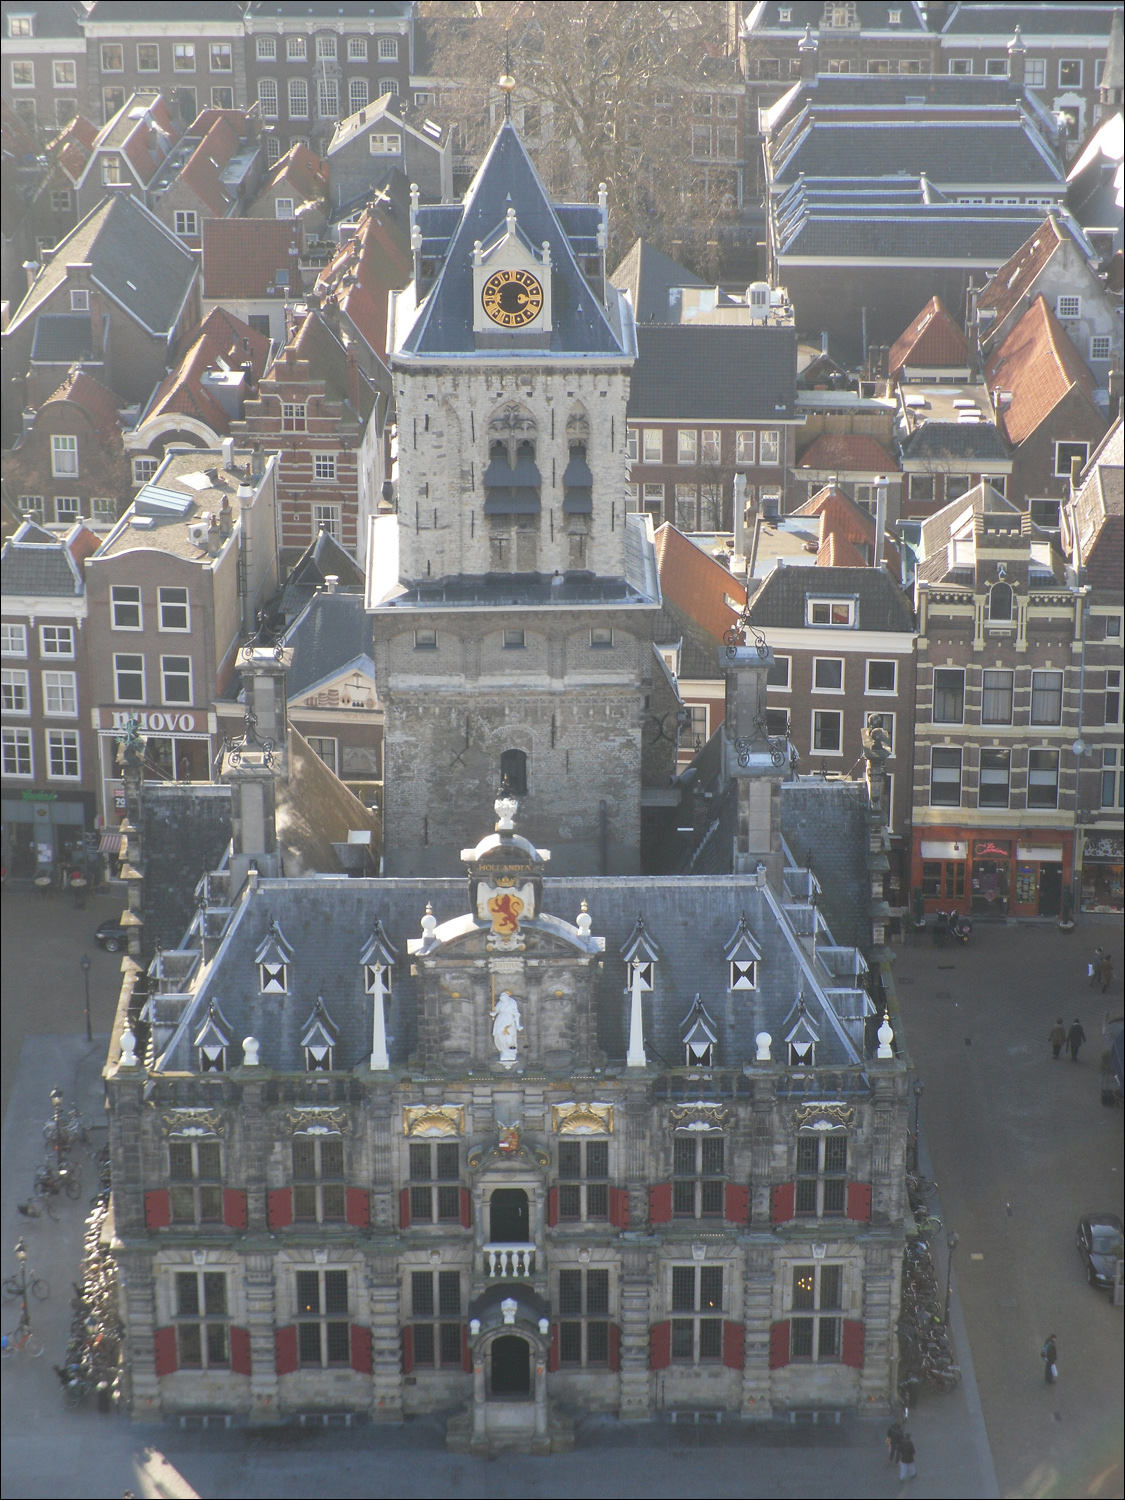 Views from the top of the clock tower on Nieuwe Kerk - View of City Hall